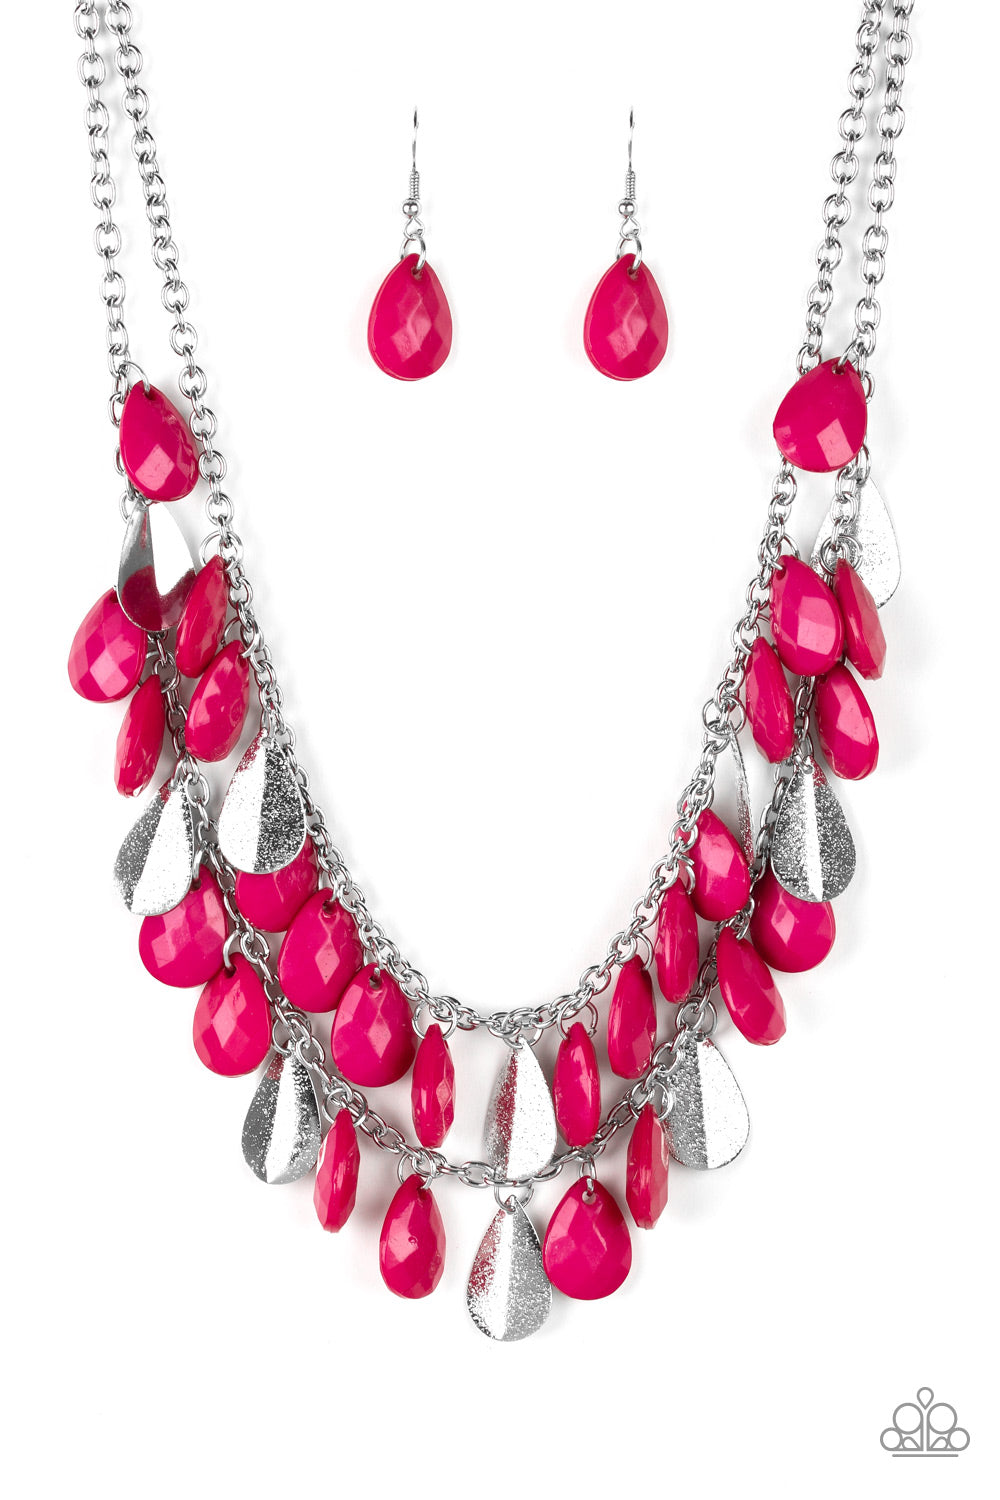 LIFE OF THE FIESTA - PINK AND SILVER FRINGE NECKLACE